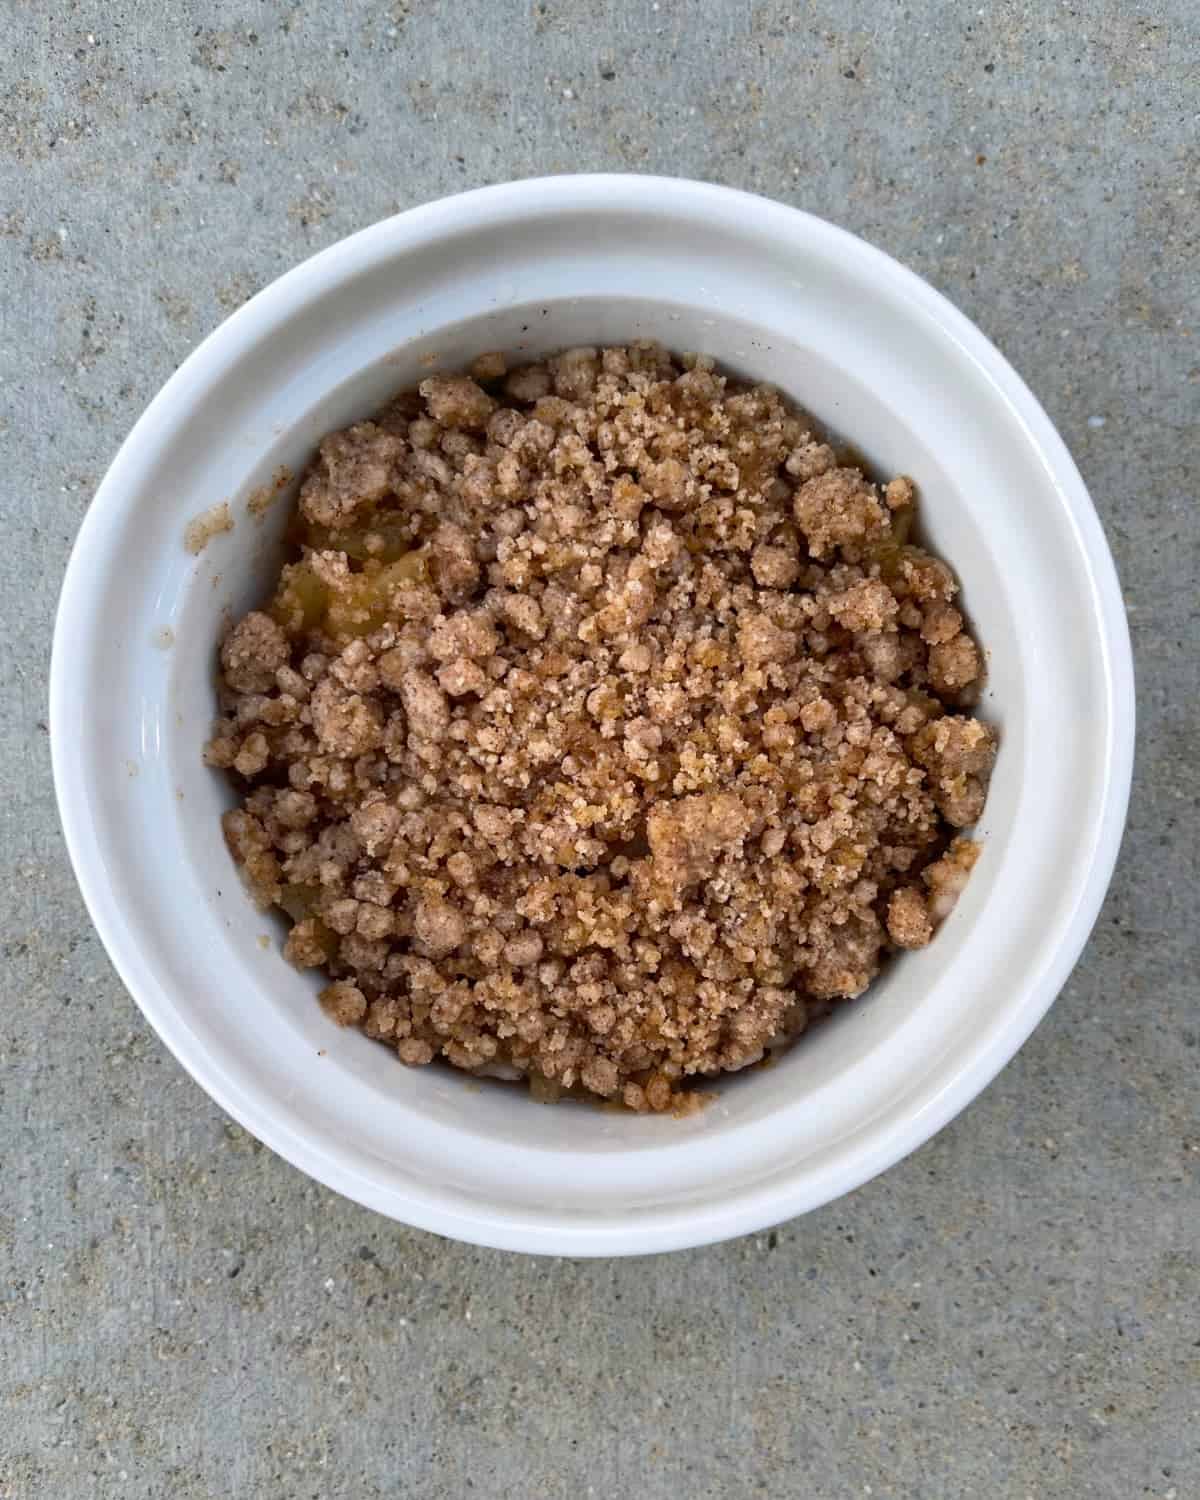 Microwave apple crisp in white ramekin without topping.